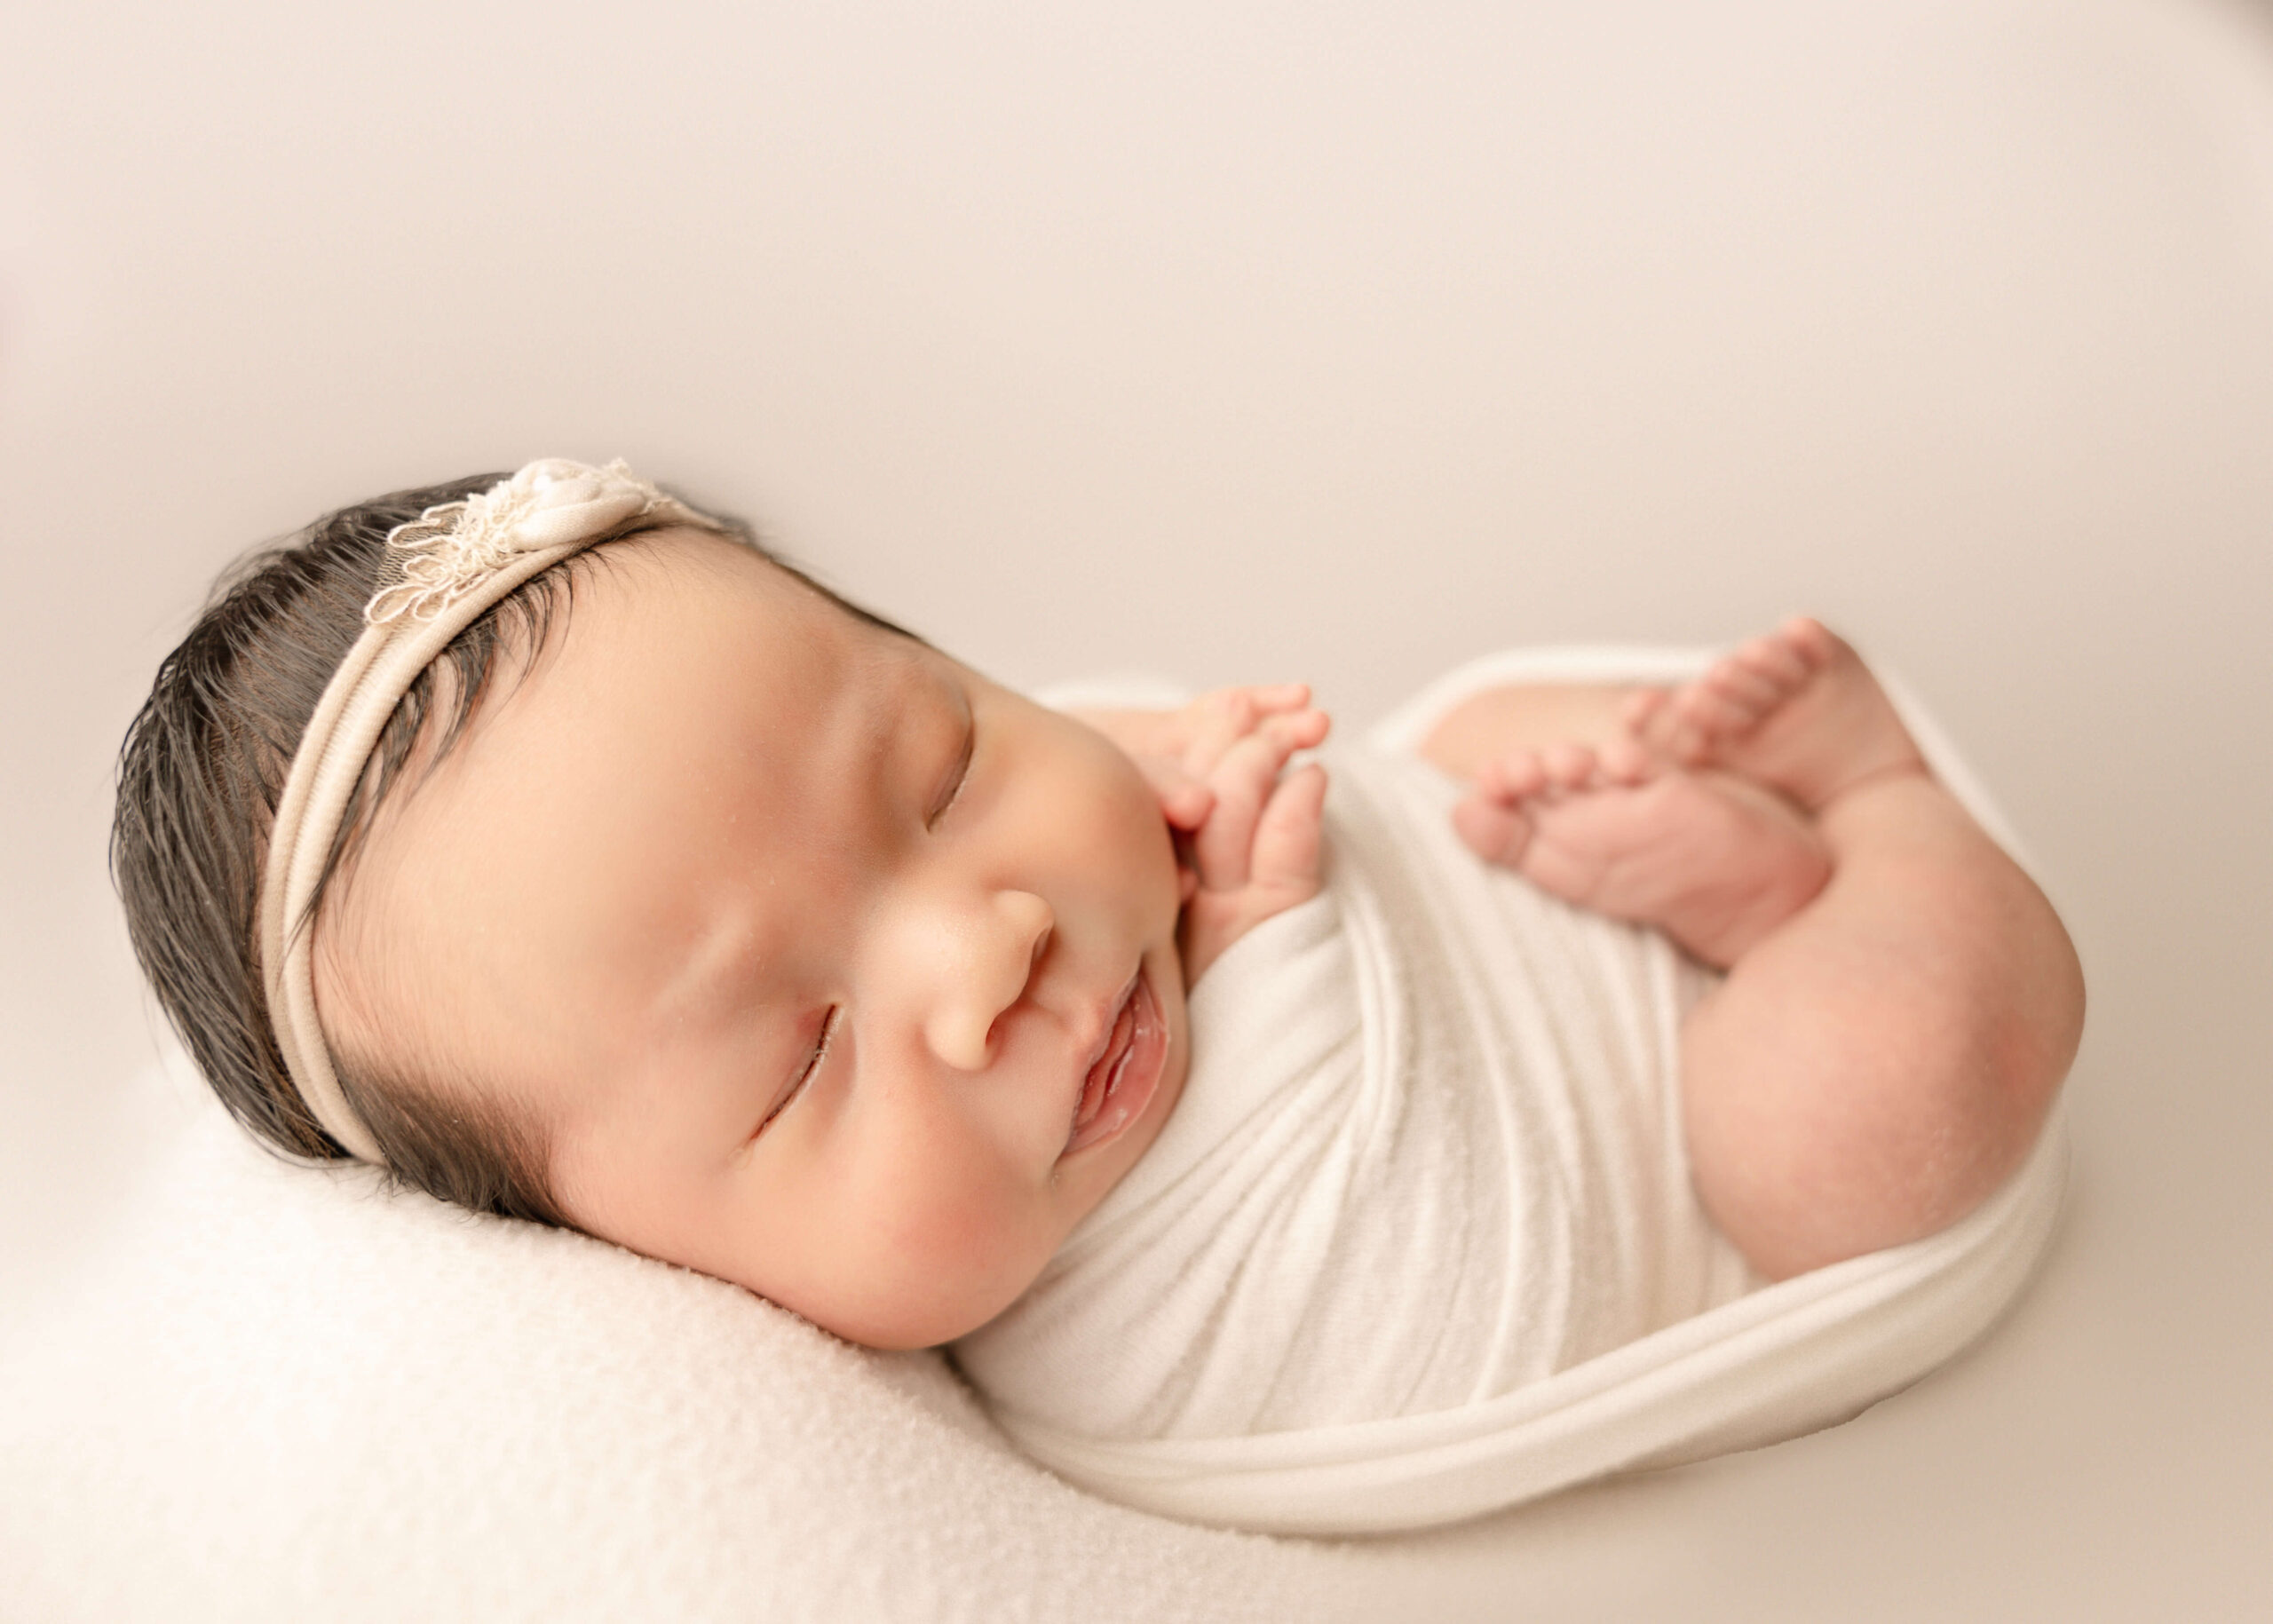 Sleeping baby wrapped in white swaddle blanket in studio Newborn session by Ashley Nicole Photography for Los Angeles Fertility Clinics.